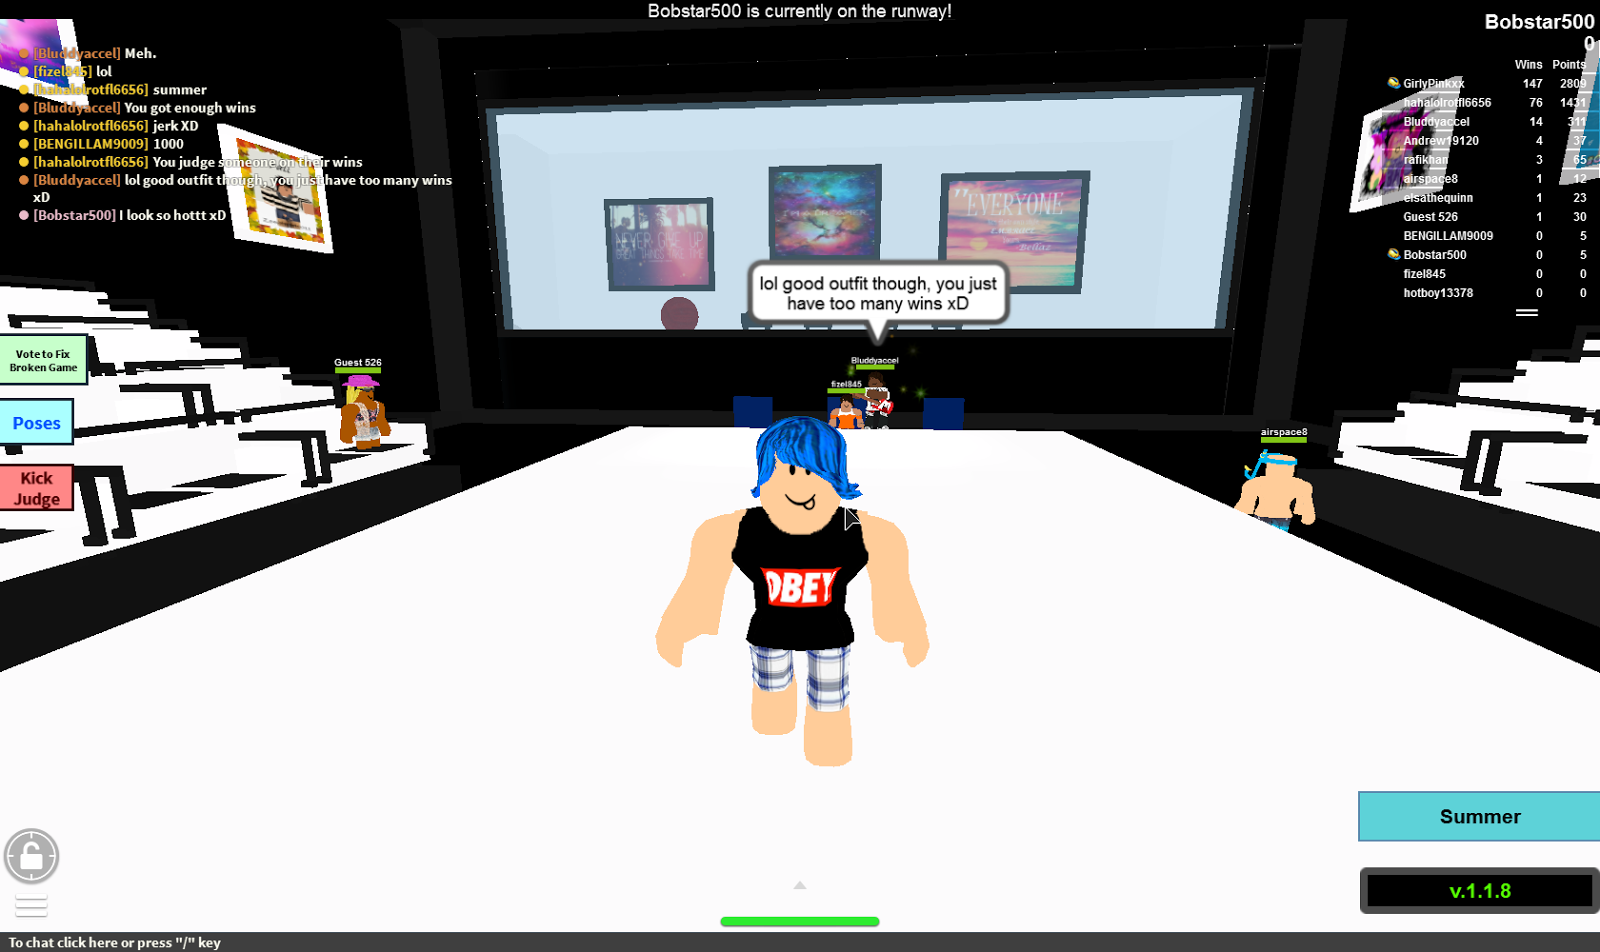 Unofficial Roblox Roblox Games Best Of 2014 - roblox times sunday september 26 2010 roblox madness